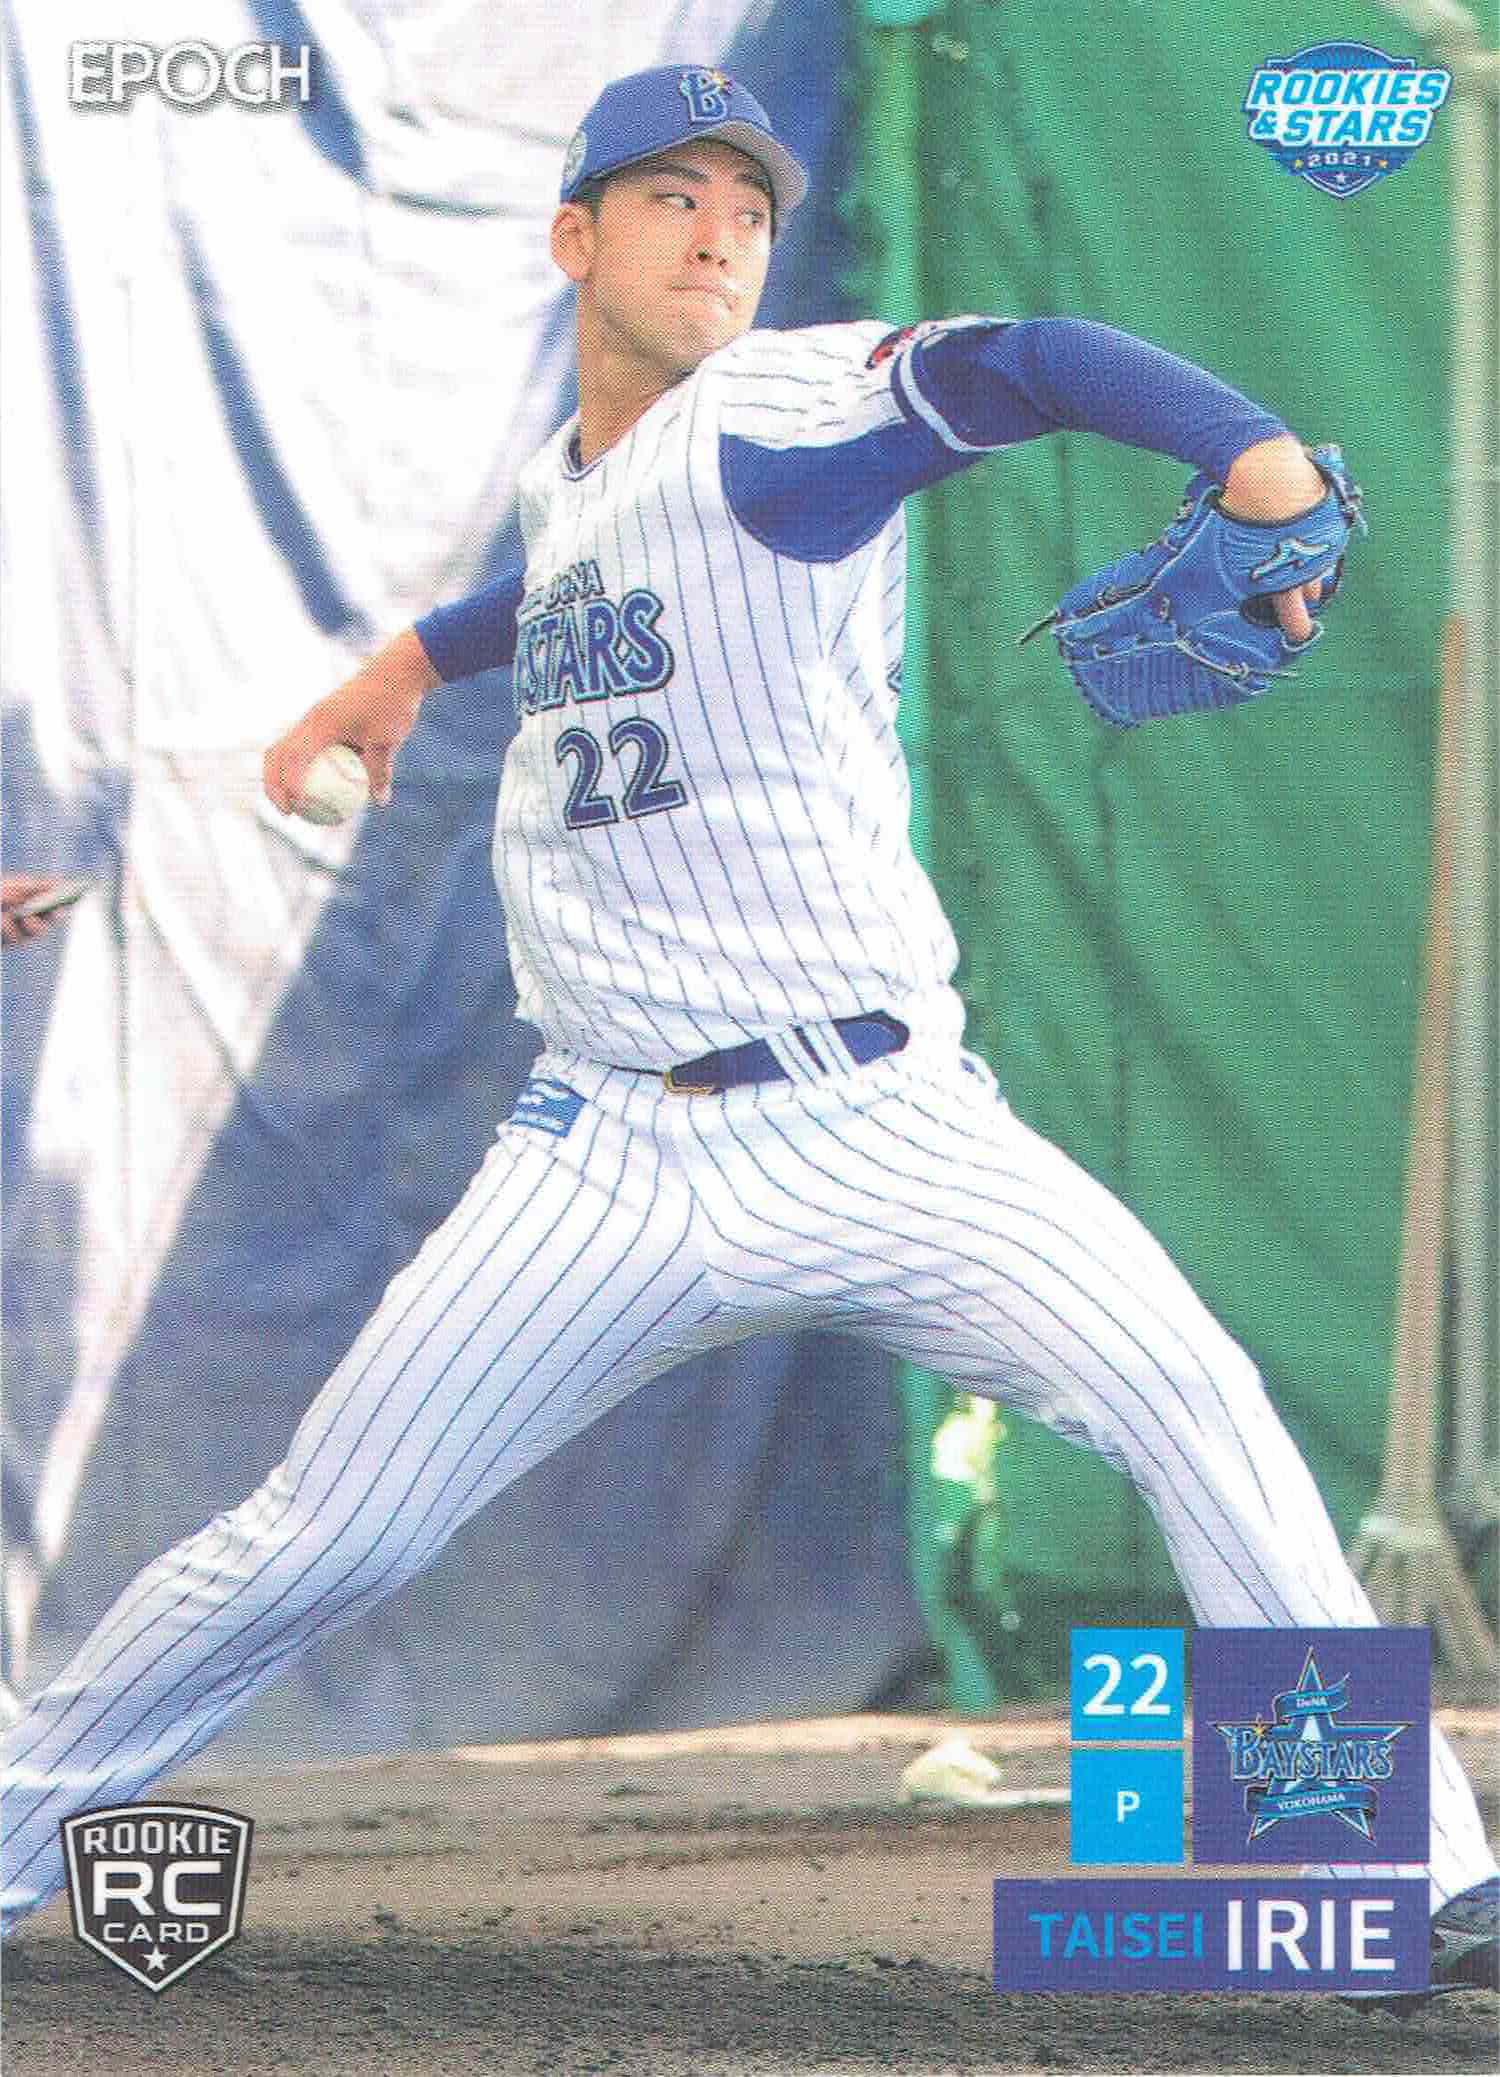 Japanese Baseball Cards: Japanese Players In the Australian Baseball League  (And Other Winter Leagues)